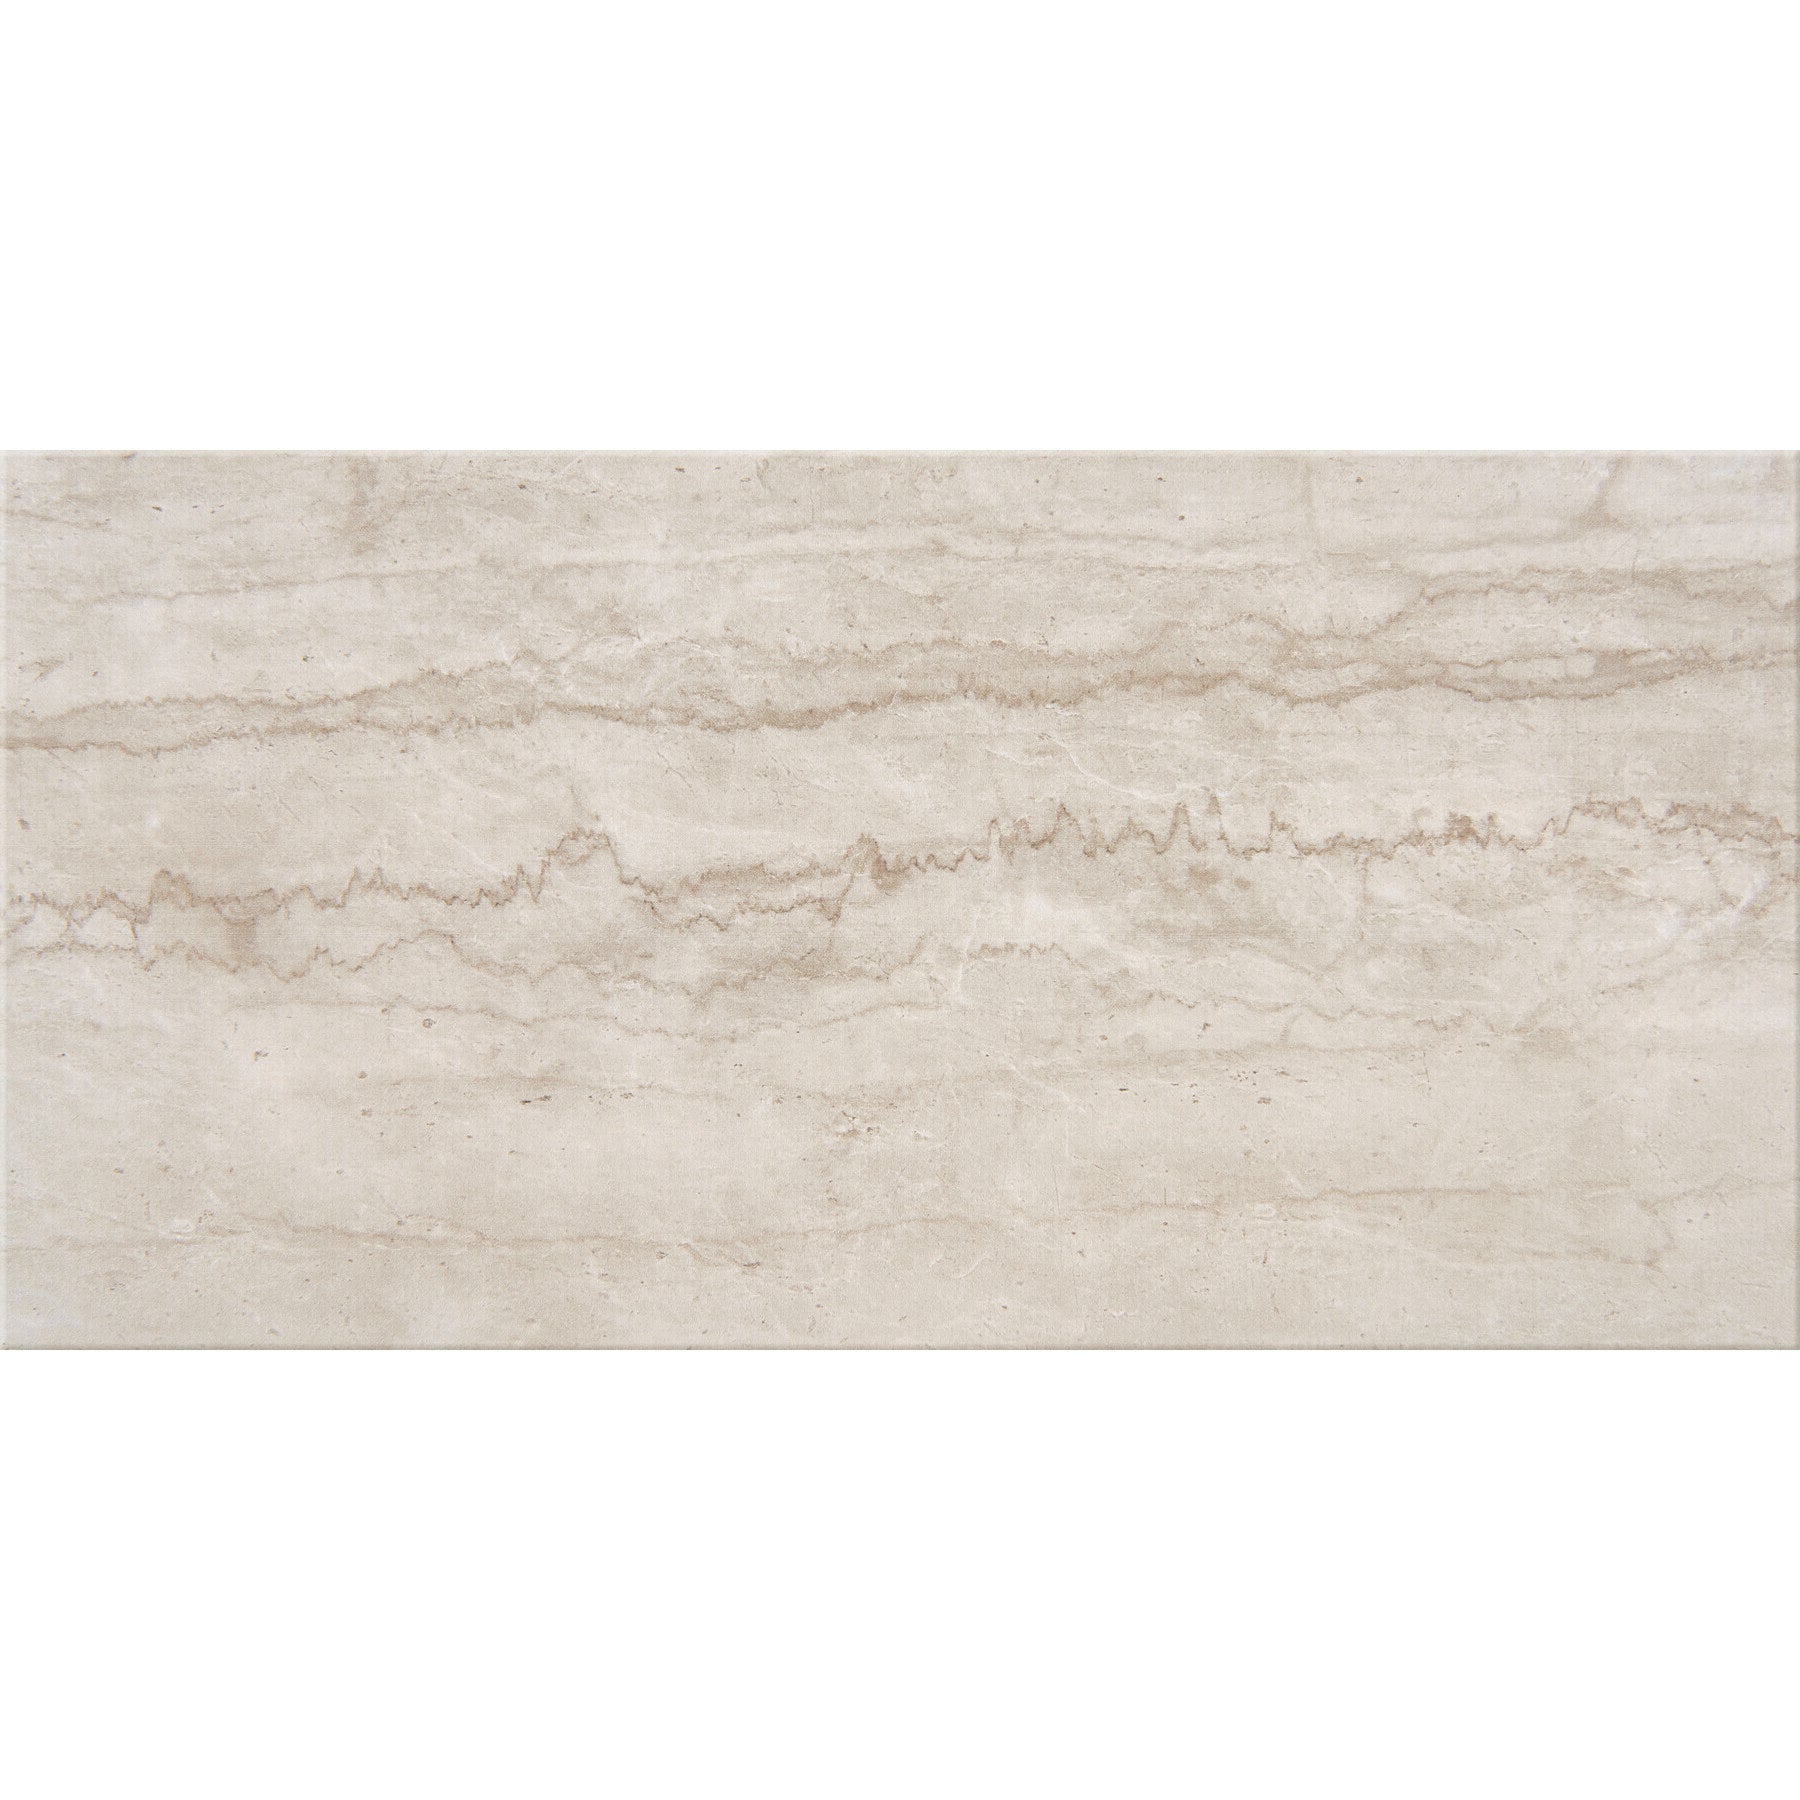 American Olean - Mythique Marble 12 in. x 24 in. Colorbody Porcelain Tile - Botticino Polished